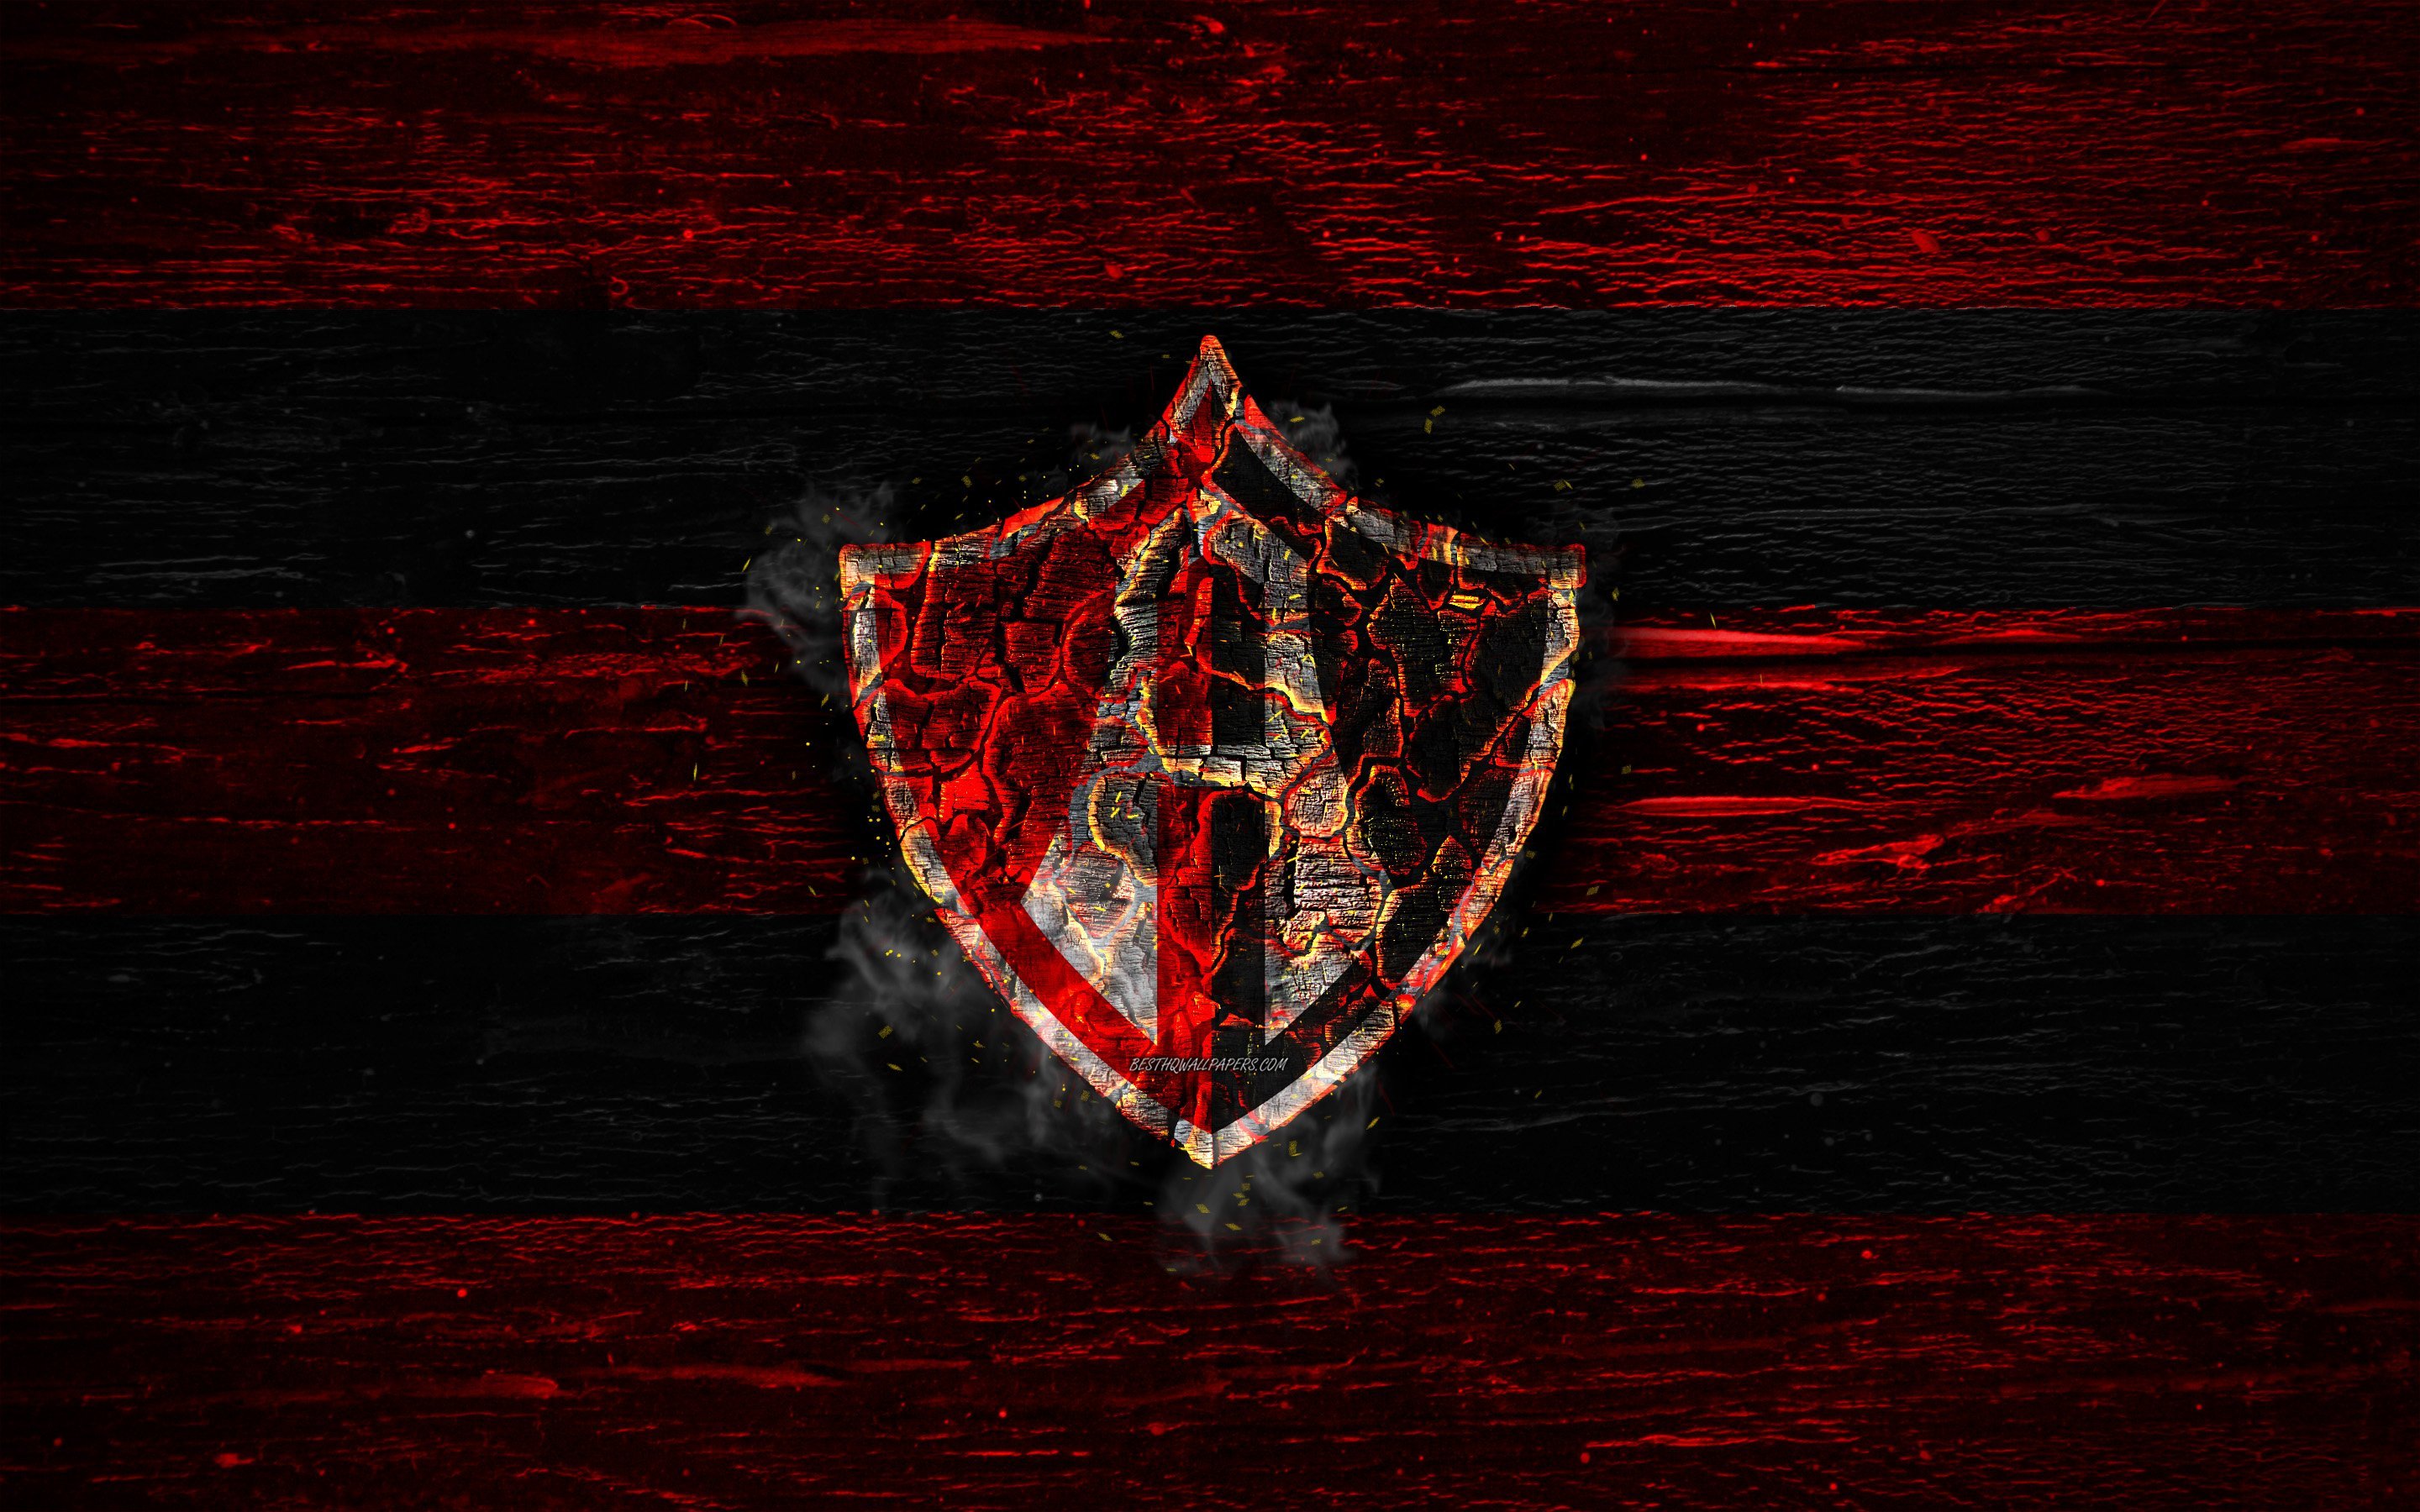 Download wallpapers Atlas FC fire logo Liga MX red and black lines  Mexican football club Primera Division grunge football soccer Atlas  logo wooden texture Mexiсo for desktop with resolution 2880x1800 High  Quality